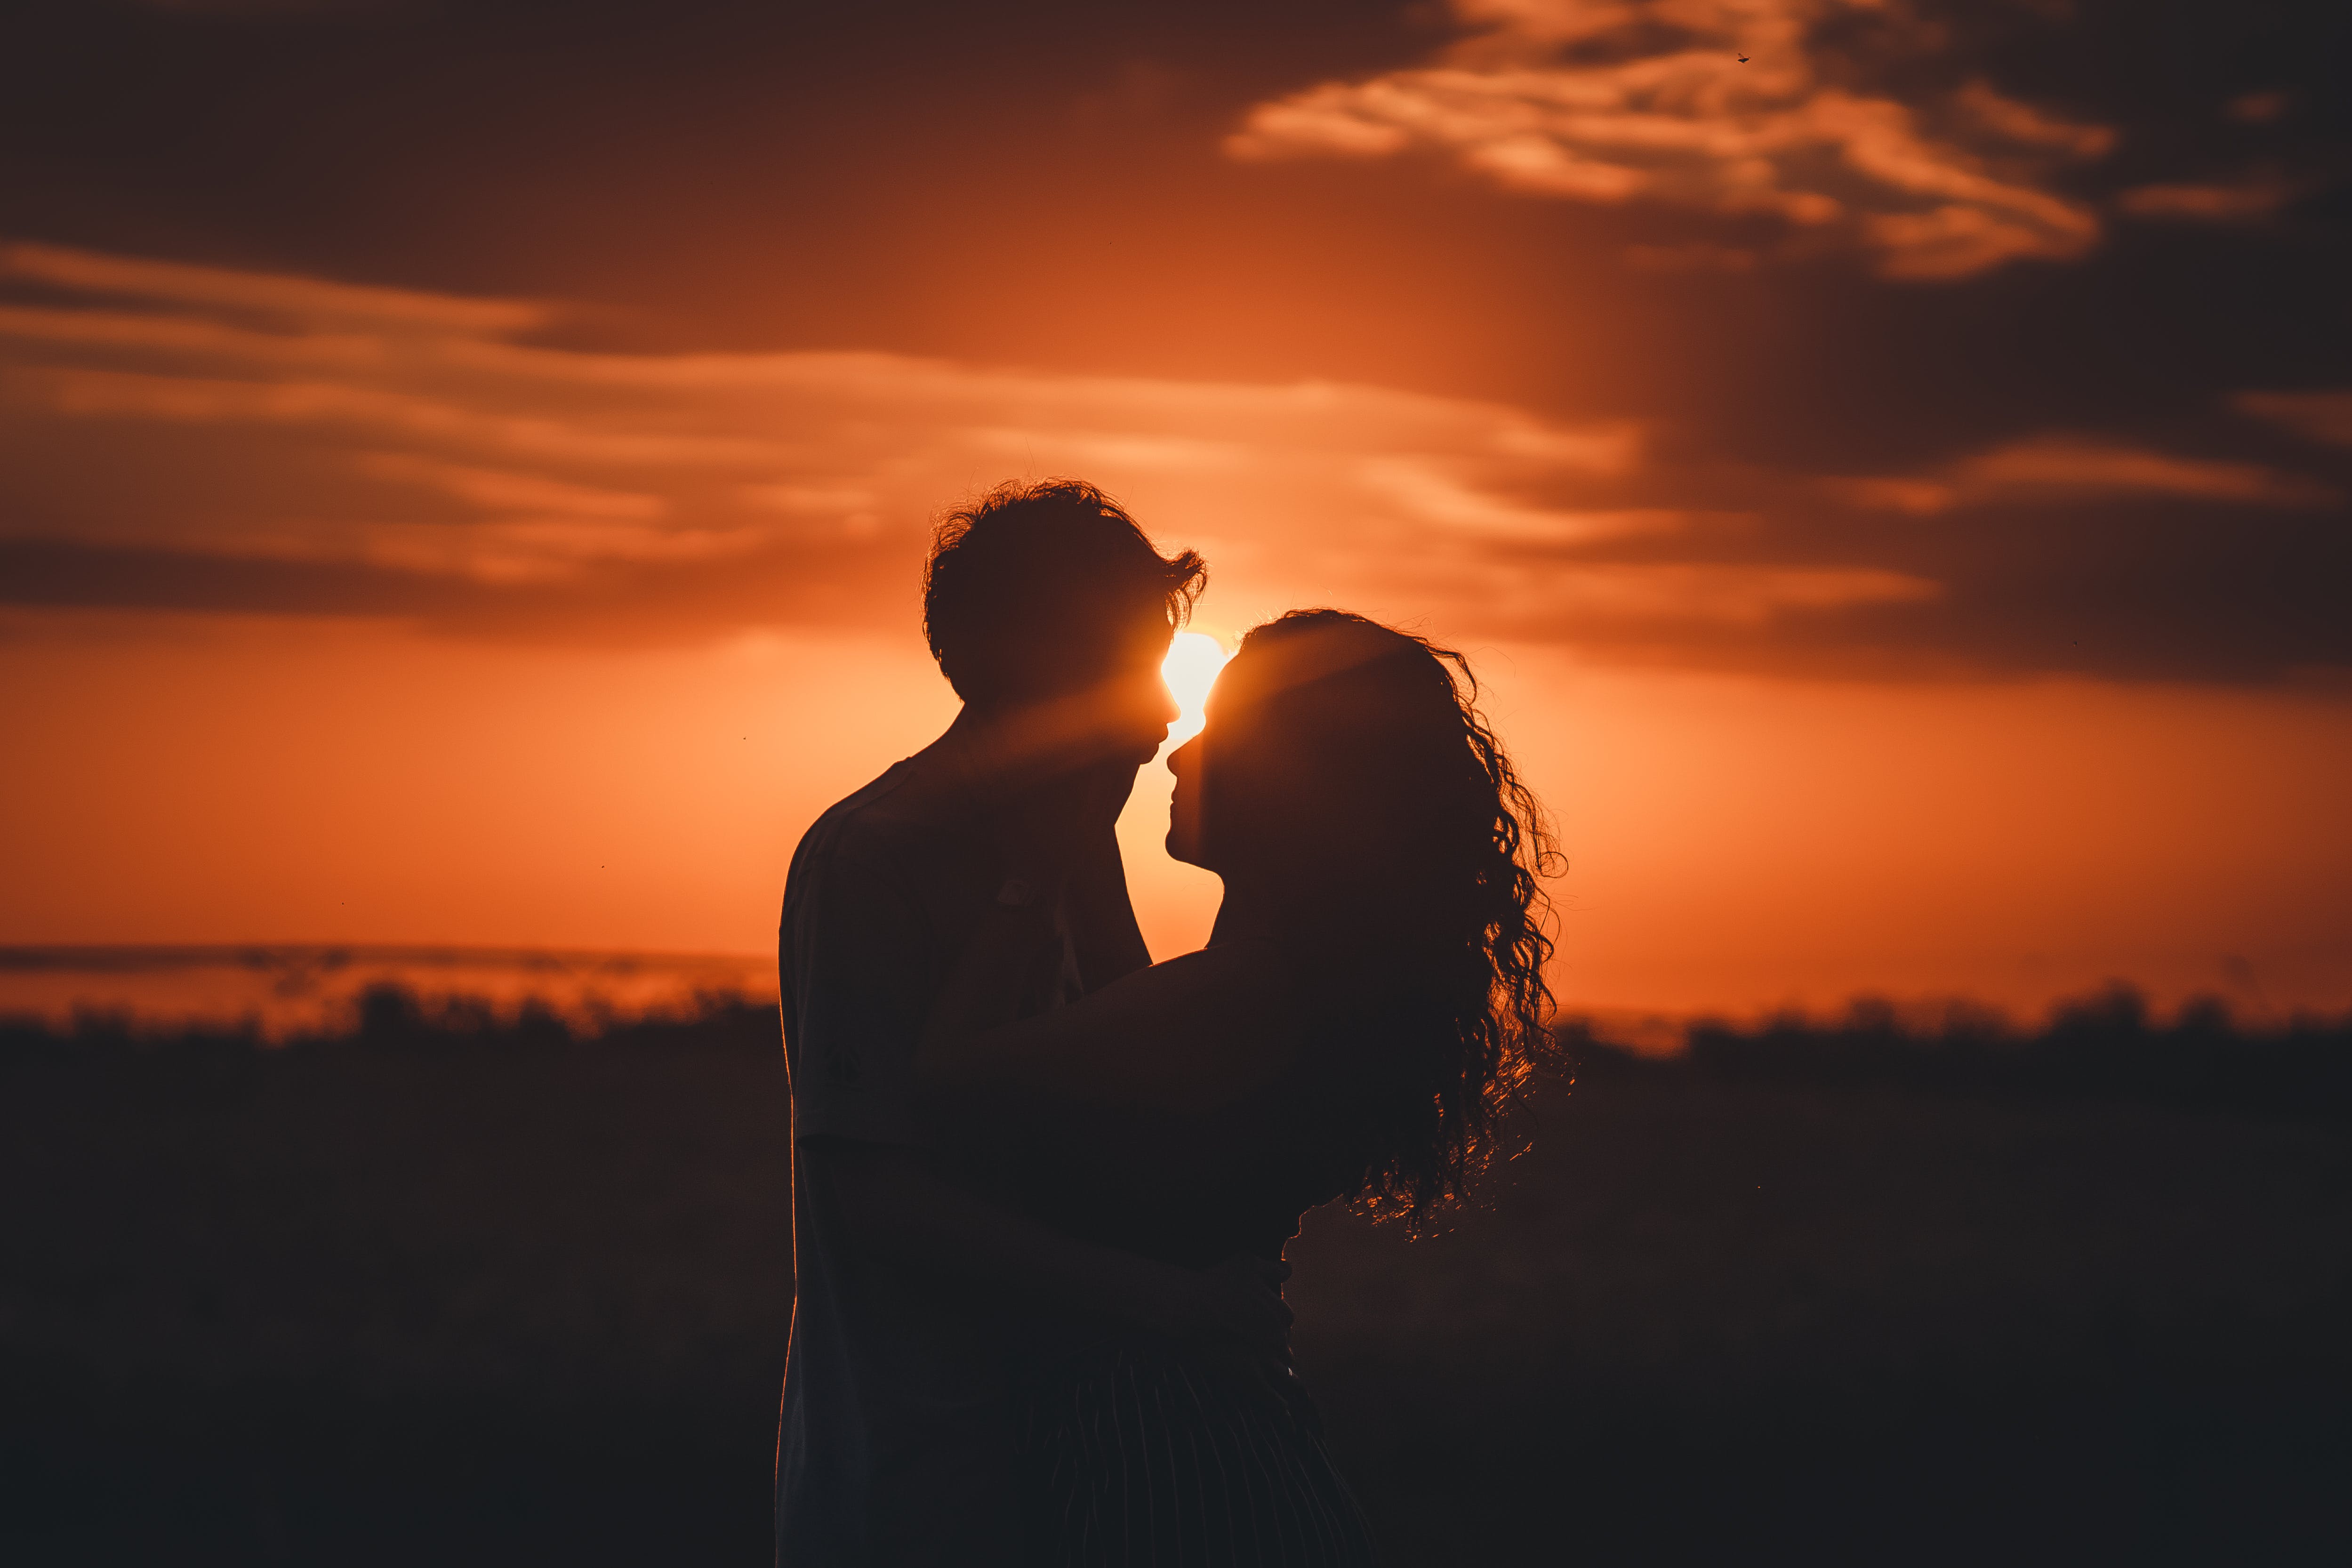 A couple embraces in front of the setting sun